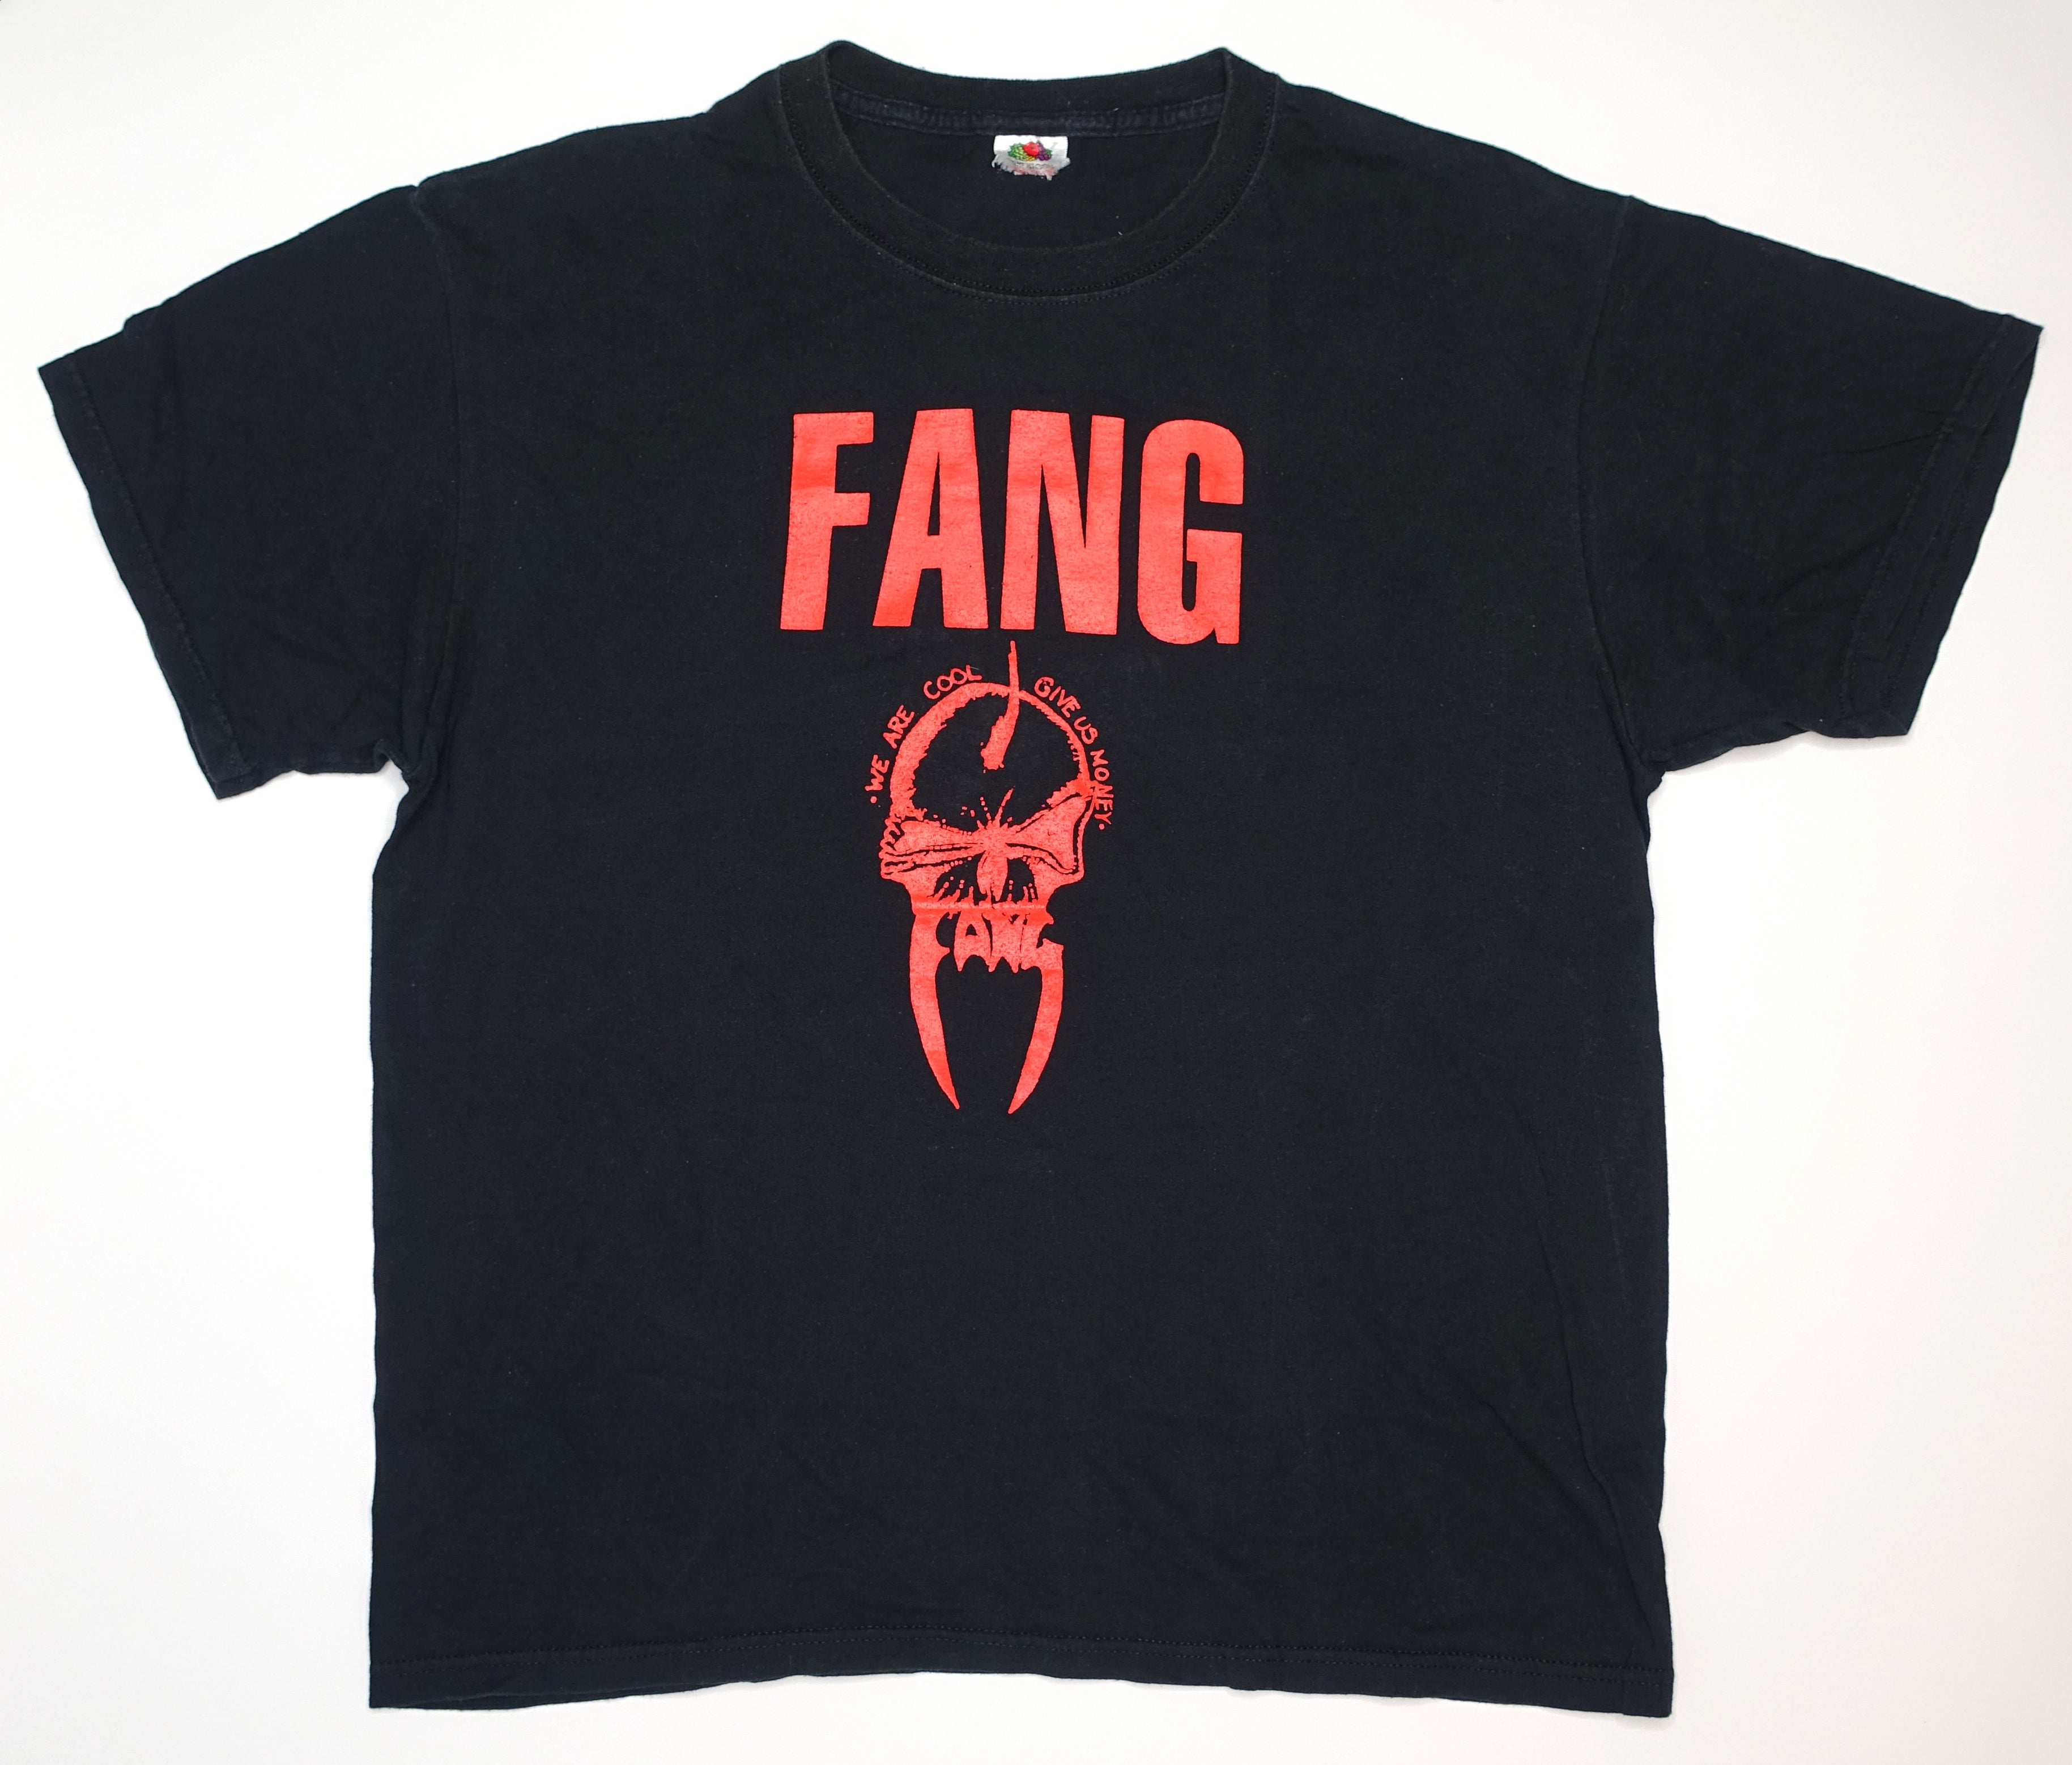 Fang – We Are Cool, Give Us Money Shirt Size XL